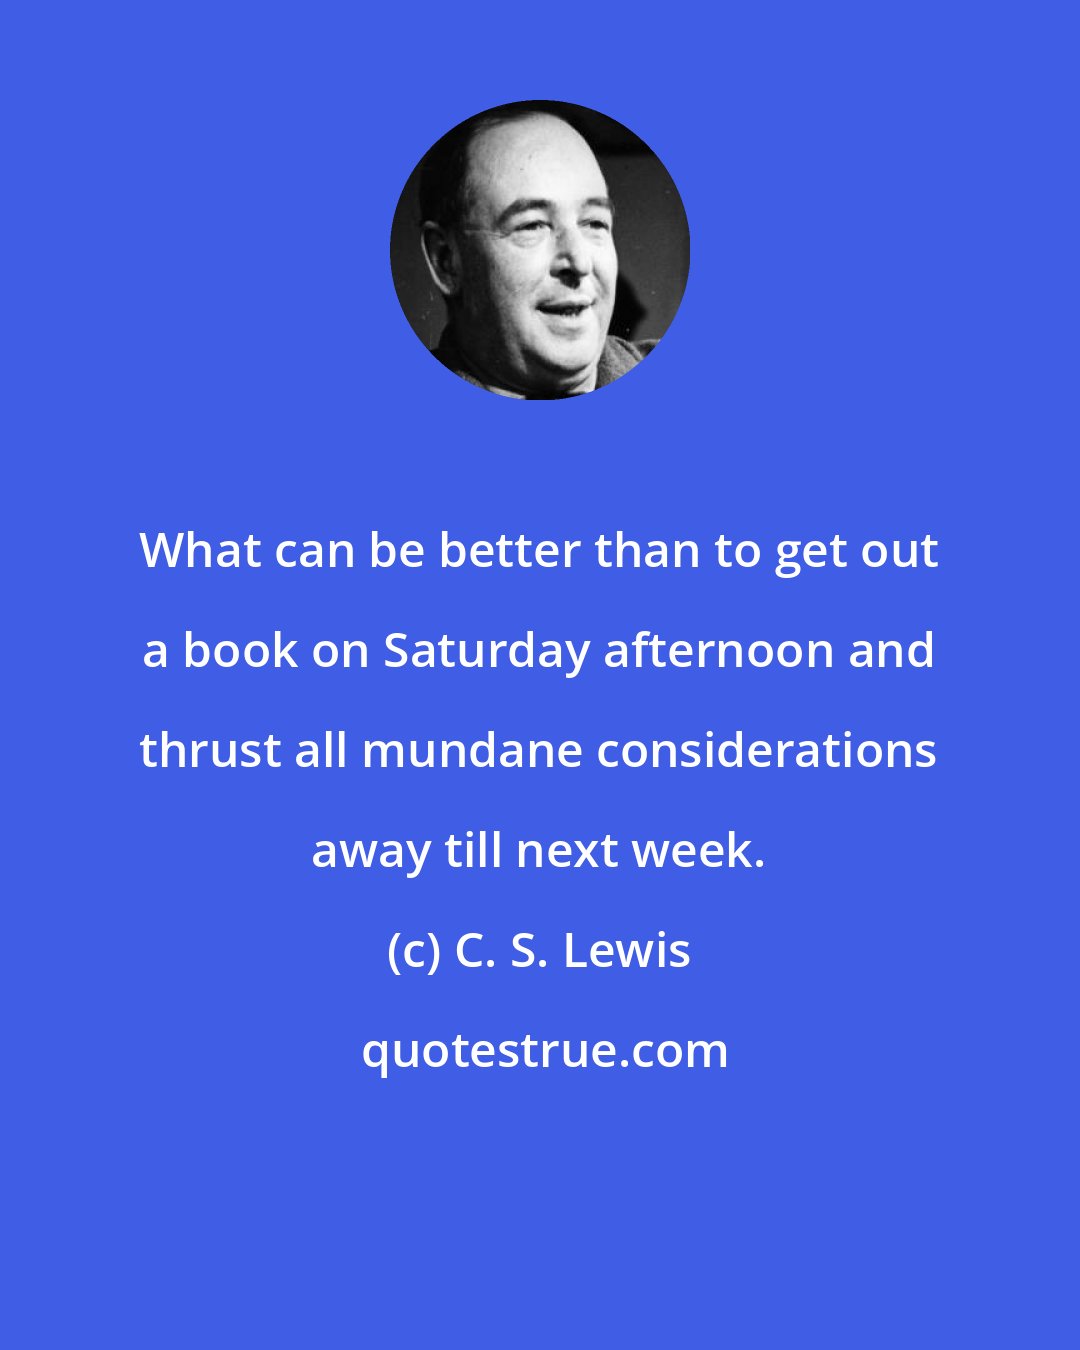 C. S. Lewis: What can be better than to get out a book on Saturday afternoon and thrust all mundane considerations away till next week.